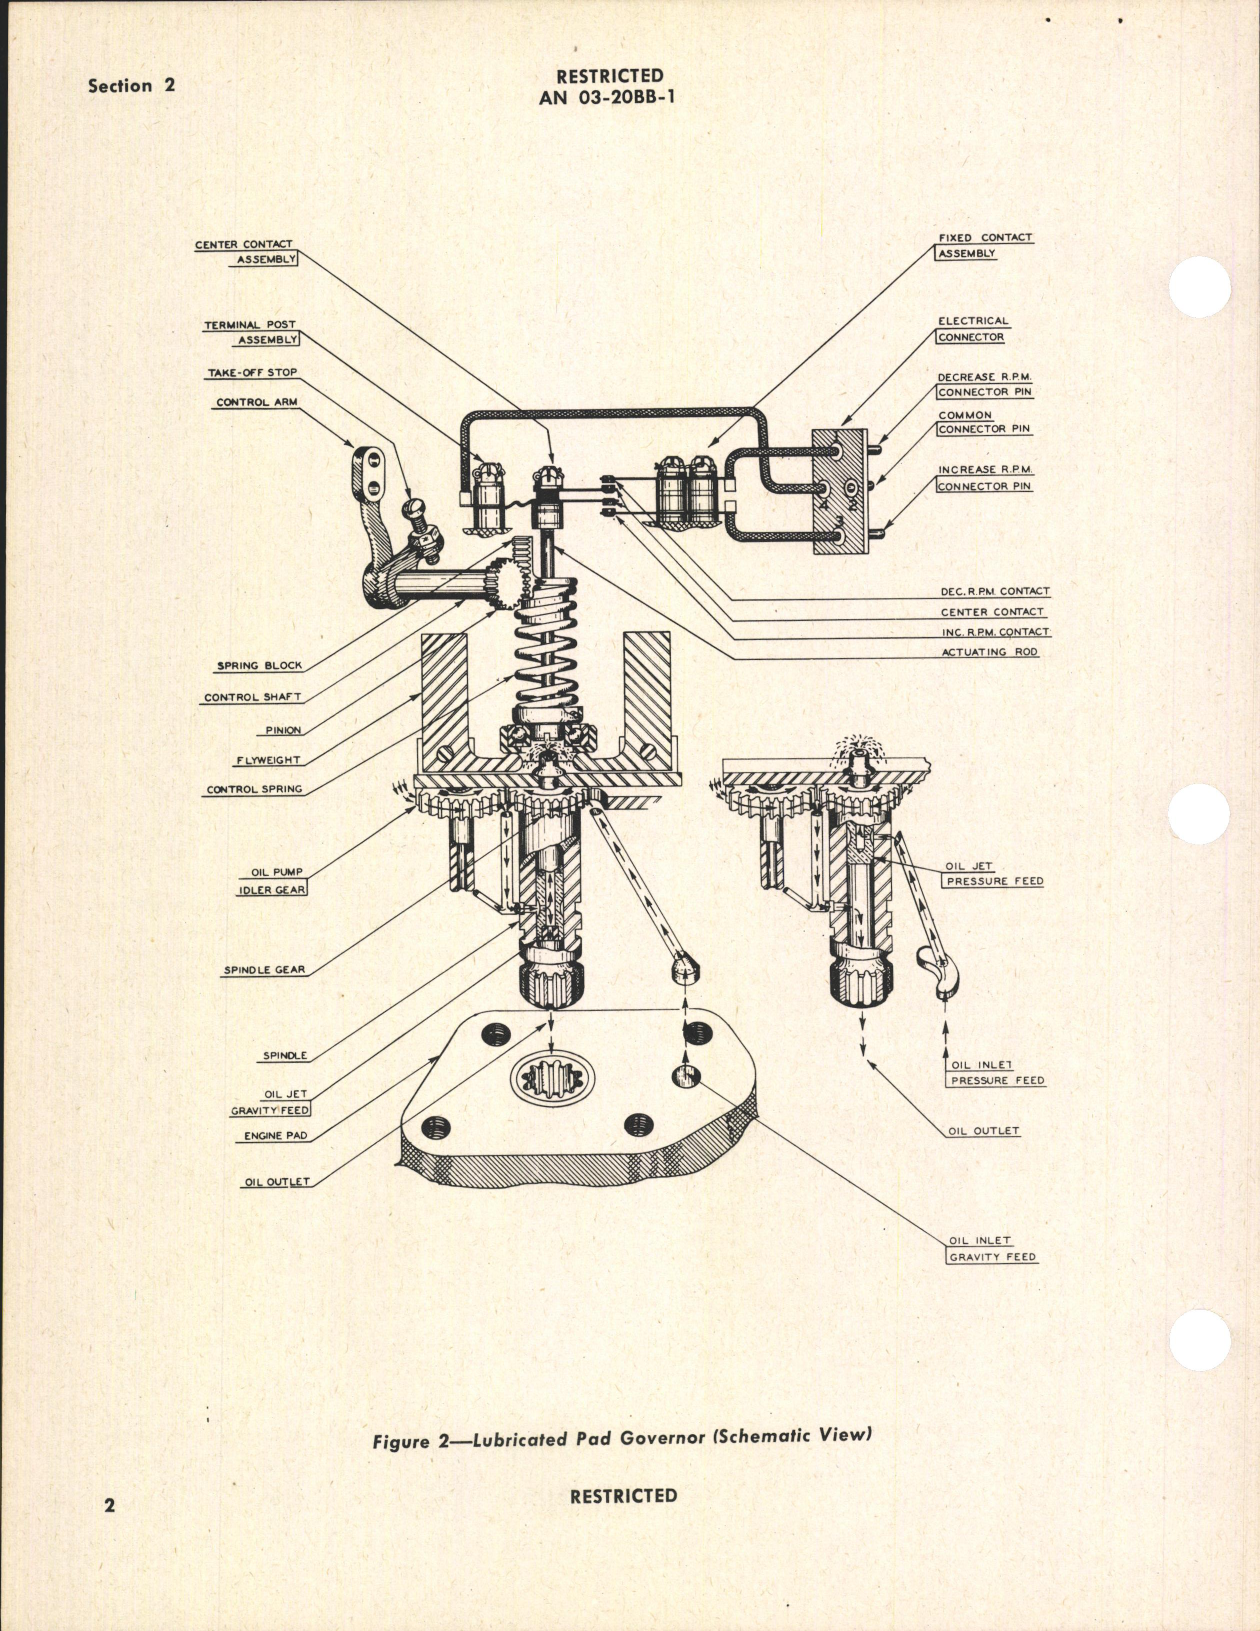 Sample page 6 from AirCorps Library document: Handbook of Instructions with Parts Catalog for Lubricated Pad Type Governor